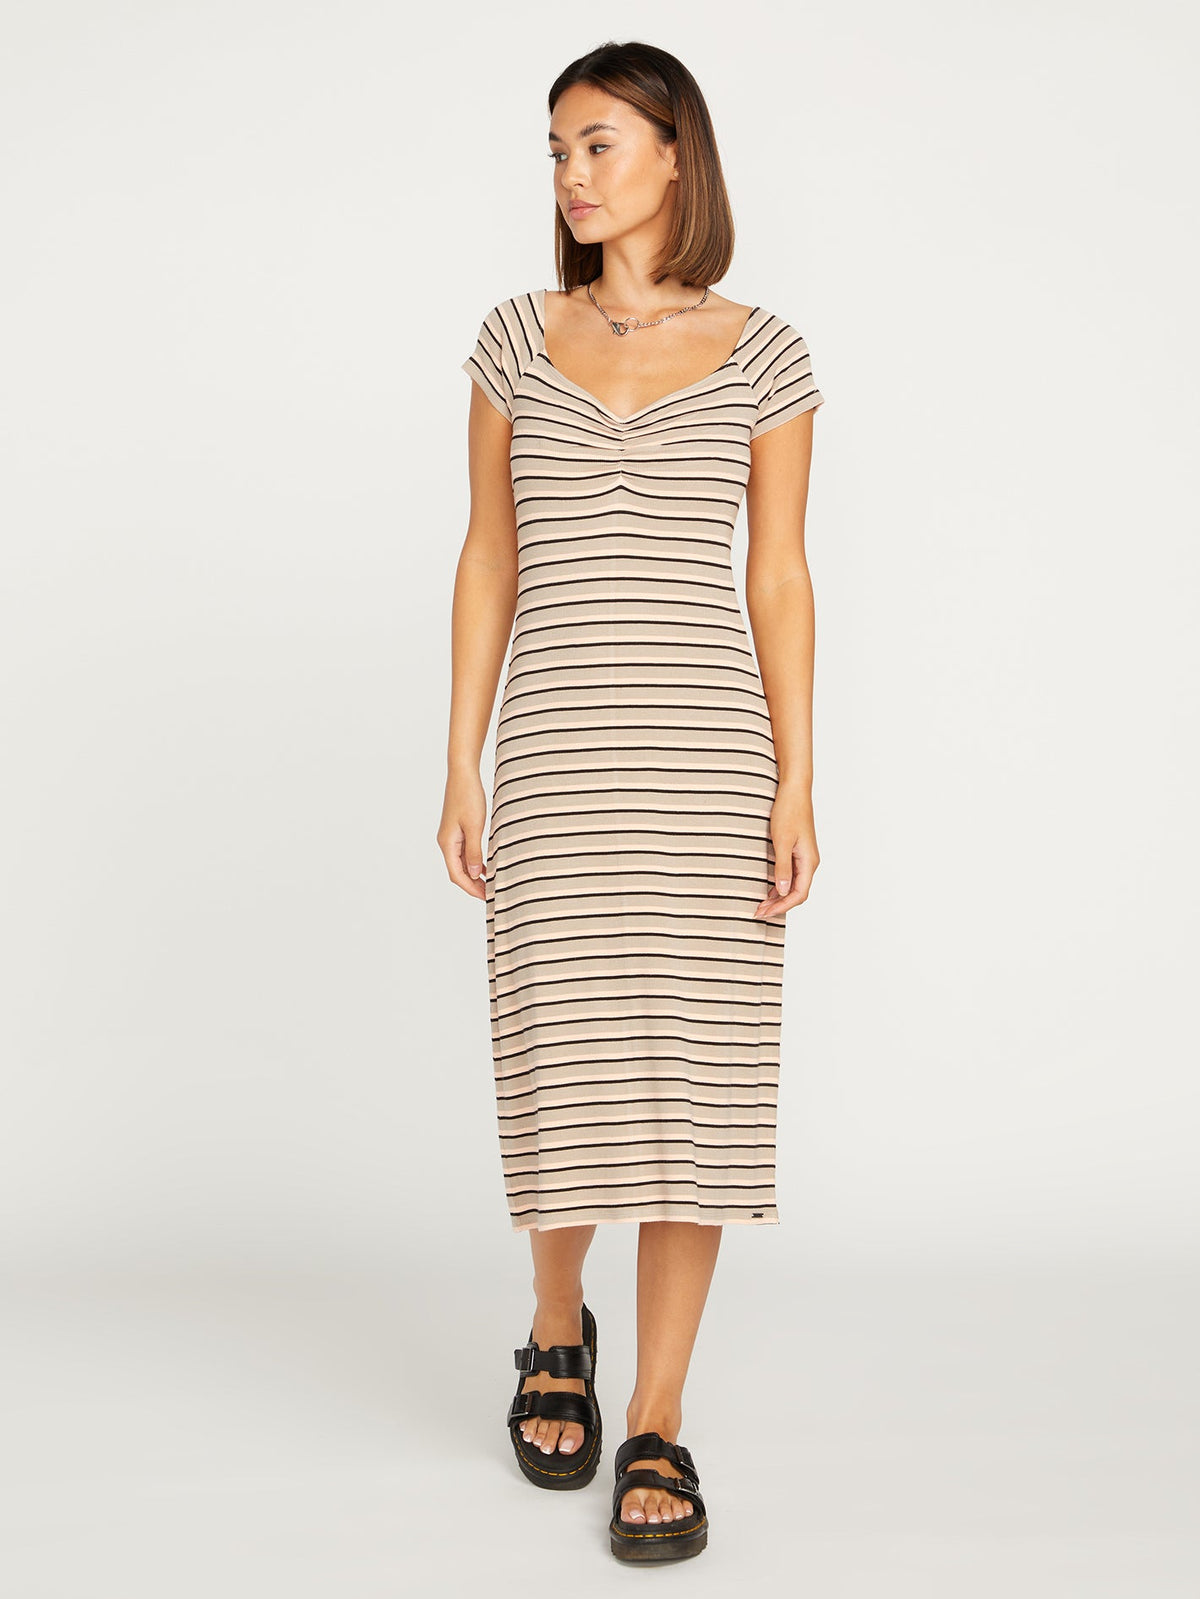 Volcom All Booed Up Women's Dress Taupe